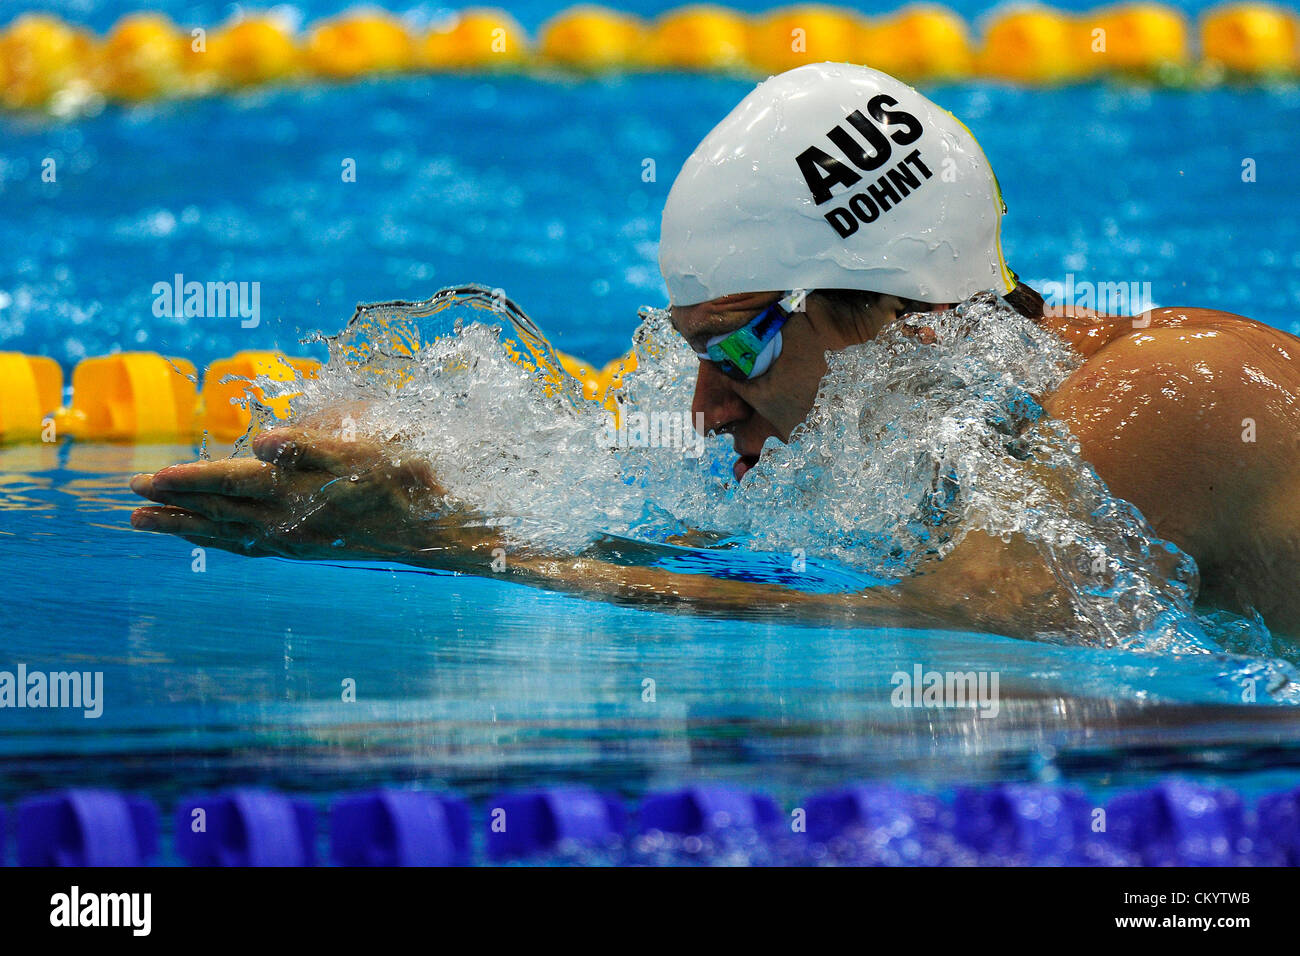 Stratford, London, UK. 5th September 2012. Jay Dohnt of Australia in action during the Men's 100m Breaststroke SB6 on day 7 of the London 2012 Paralympic Games at the Aquatic Centre. Credit:  Action Plus Sports Images / Alamy Live News Stock Photo